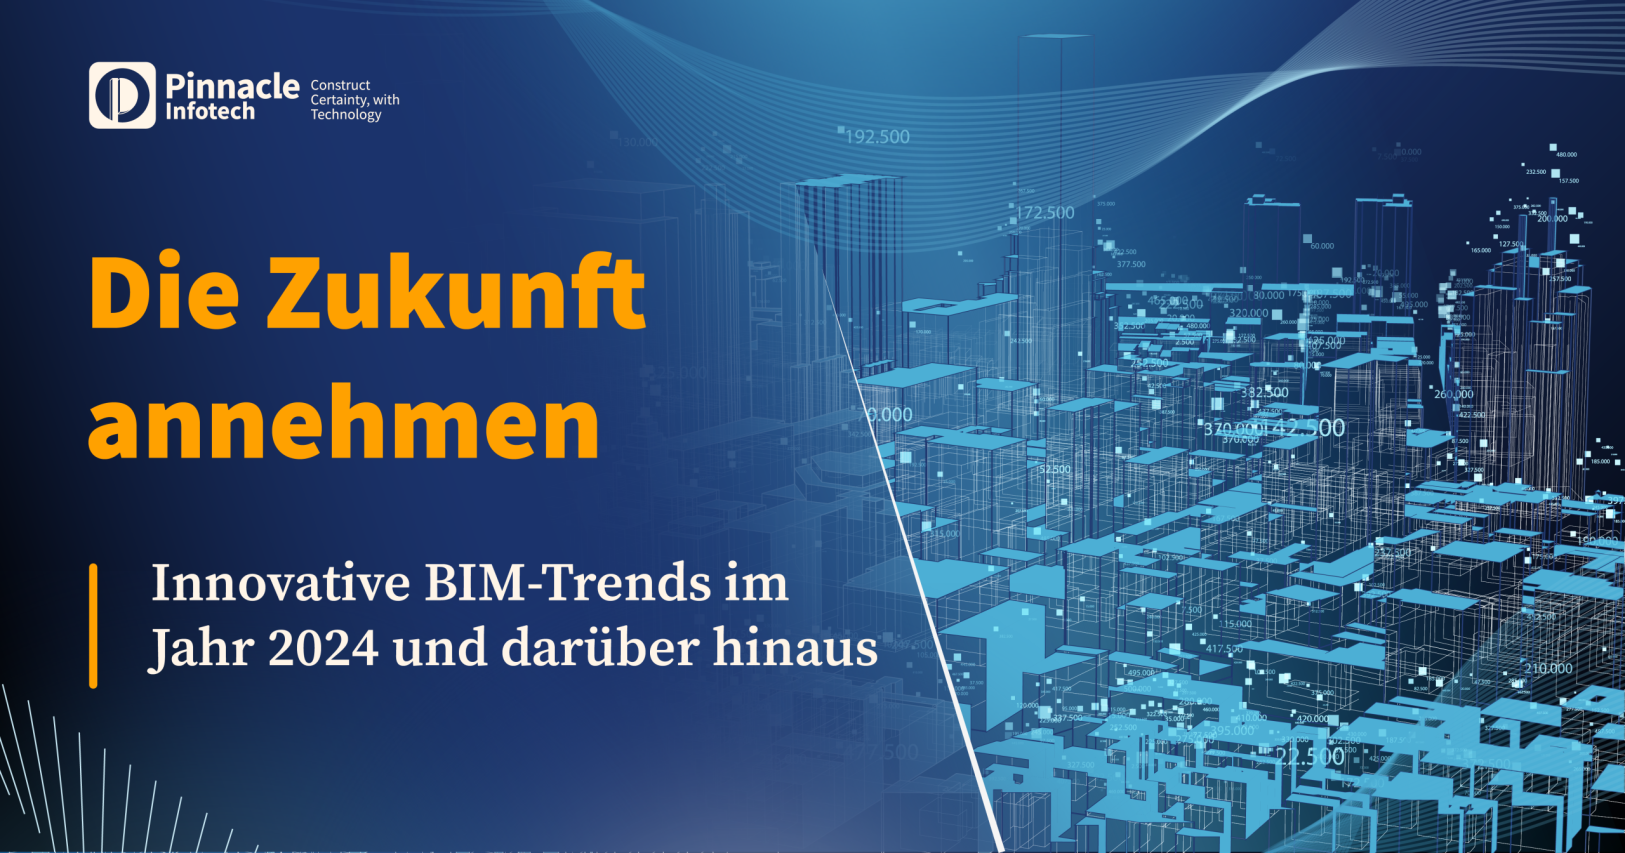 Graphic illustration of futuristic cityscape with overlaid data points and text in German promoting innovative BIM trends for 2024 and beyond by Pinnacle Infotech.